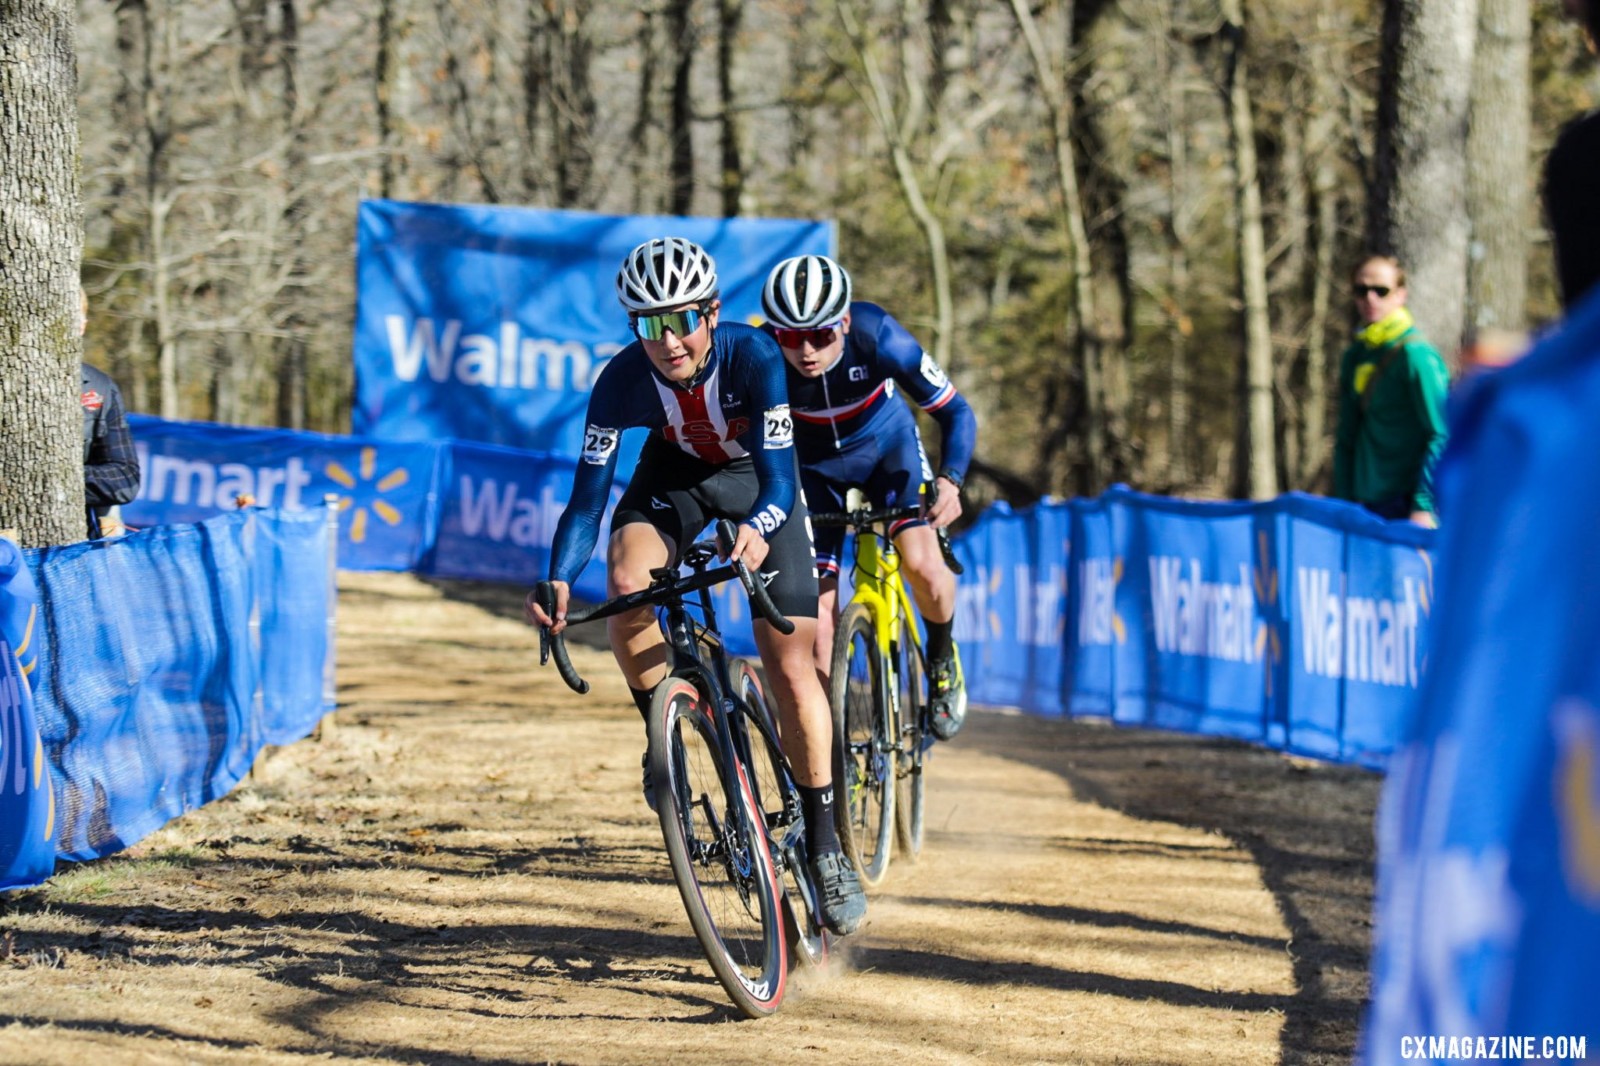 Andrew August led the North Americans with a fifth place. Junior Men. 2022 Cyclocross World Championships, Fayetteville, Arkansas USA. © D. Mable / Cyclocross Magazine